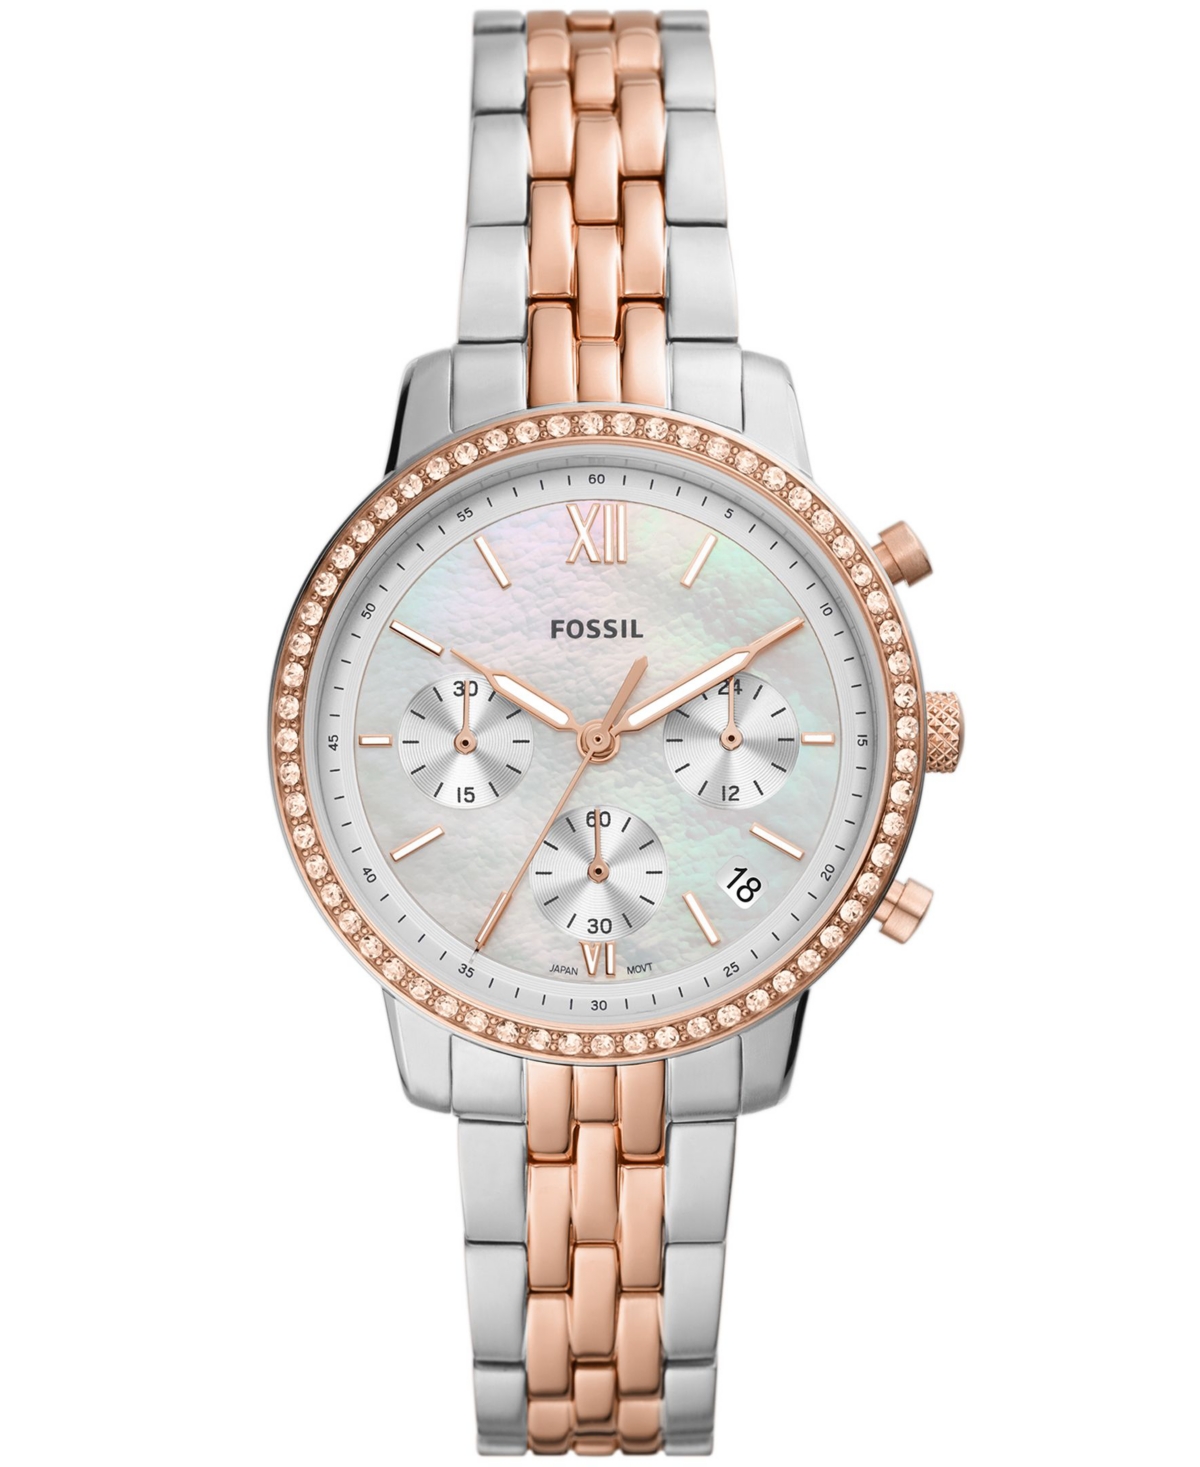 Fossil Women's Neutra Chronograph Two-tone Stainless Steel Watch, 36mm In Two Tone